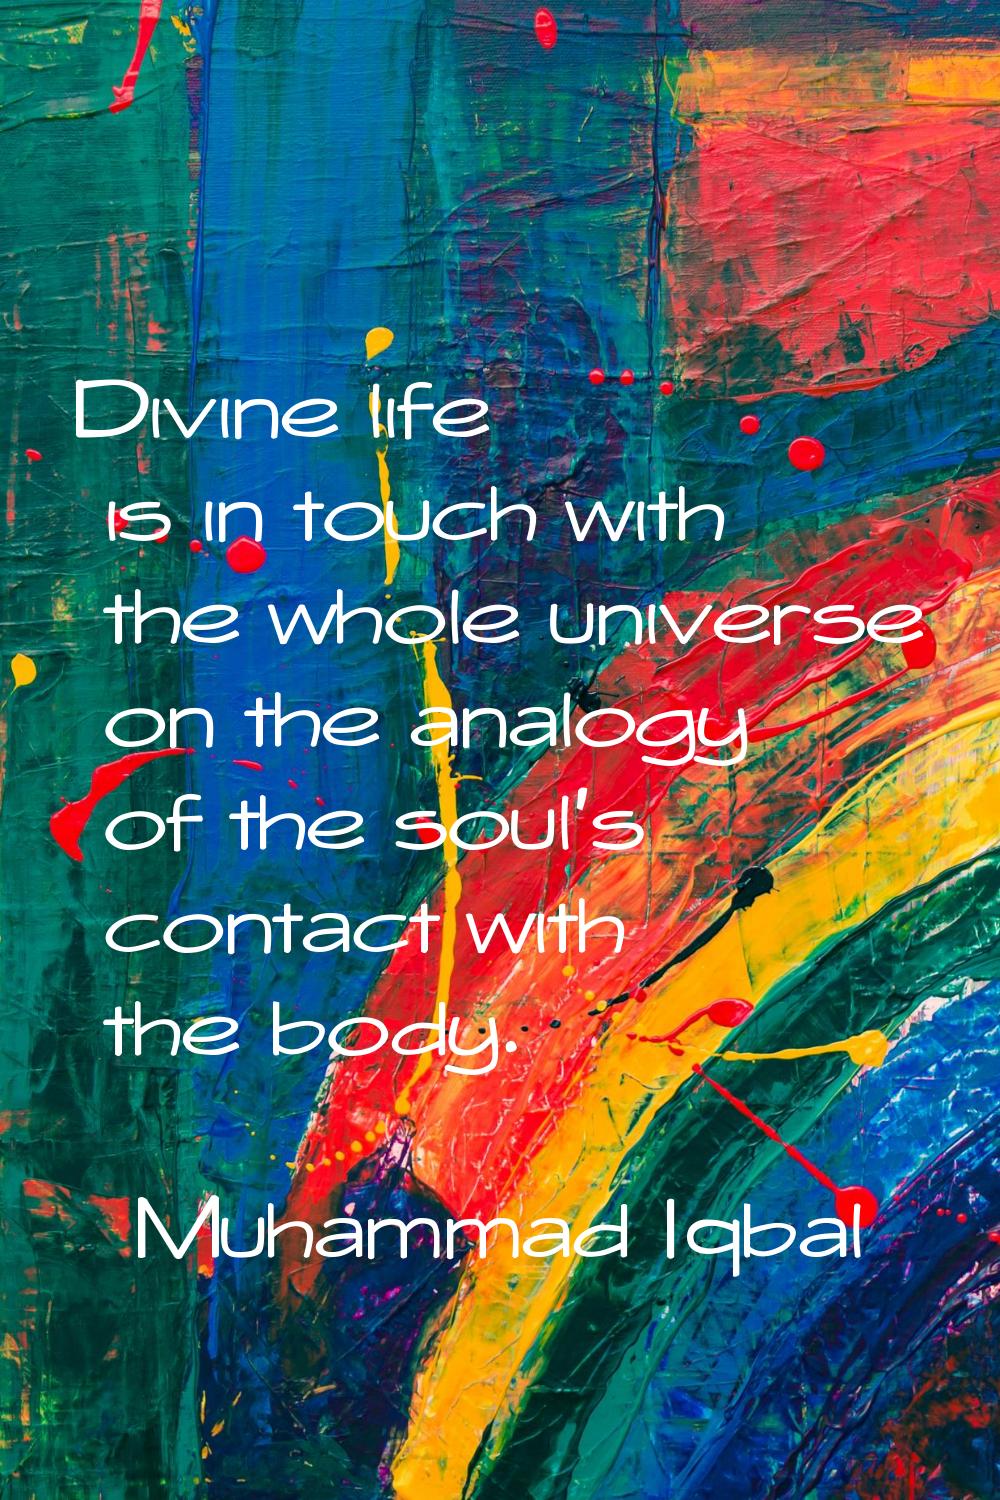 Divine life is in touch with the whole universe on the analogy of the soul's contact with the body.